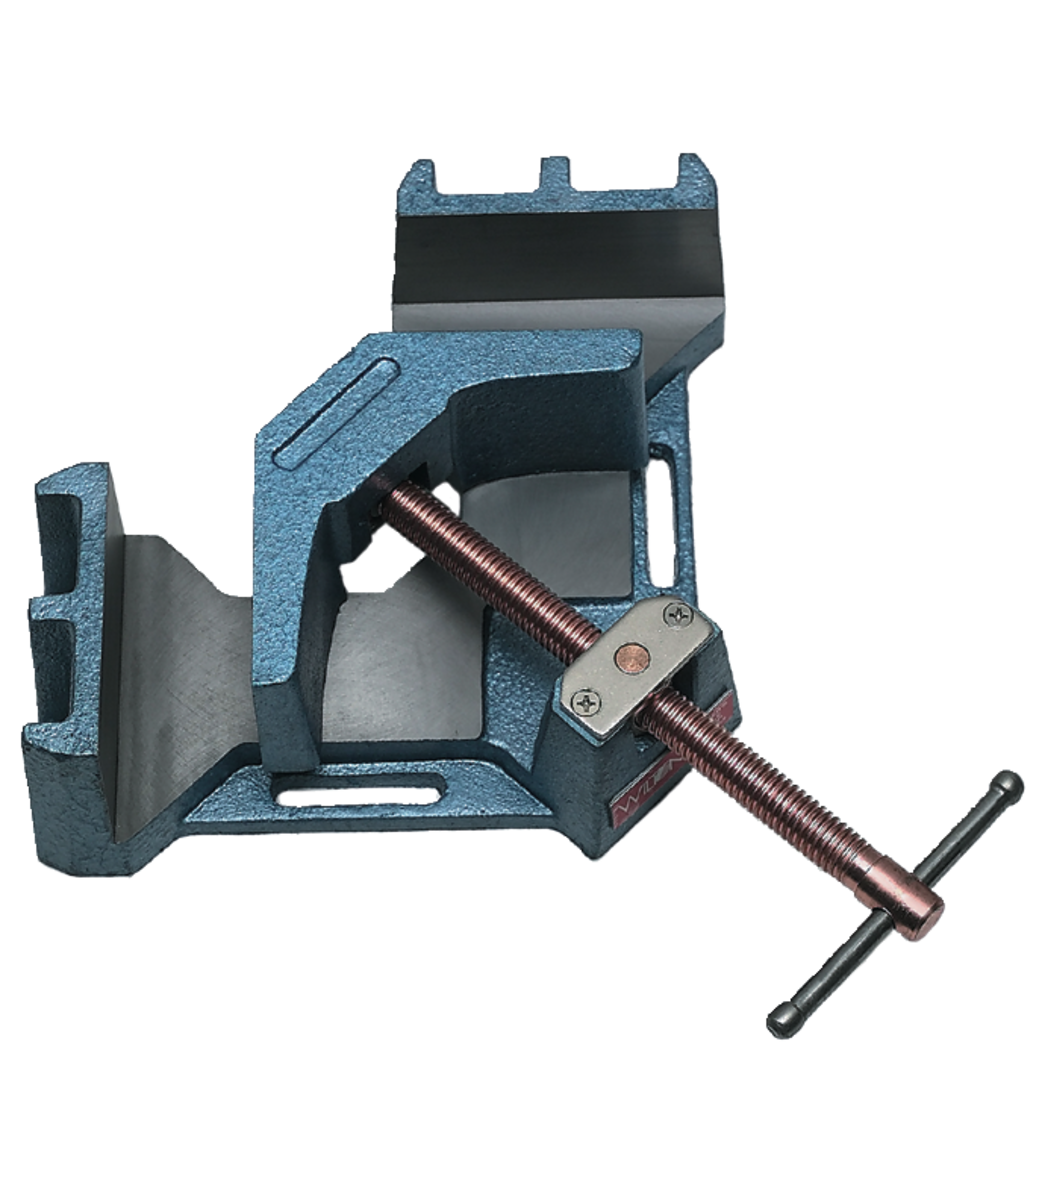 AC-326, 90° Angle Clamp, 4-3/8" Miter Capacity, 2-3/8" Jaw Height, 4-1/8" Jaw Length